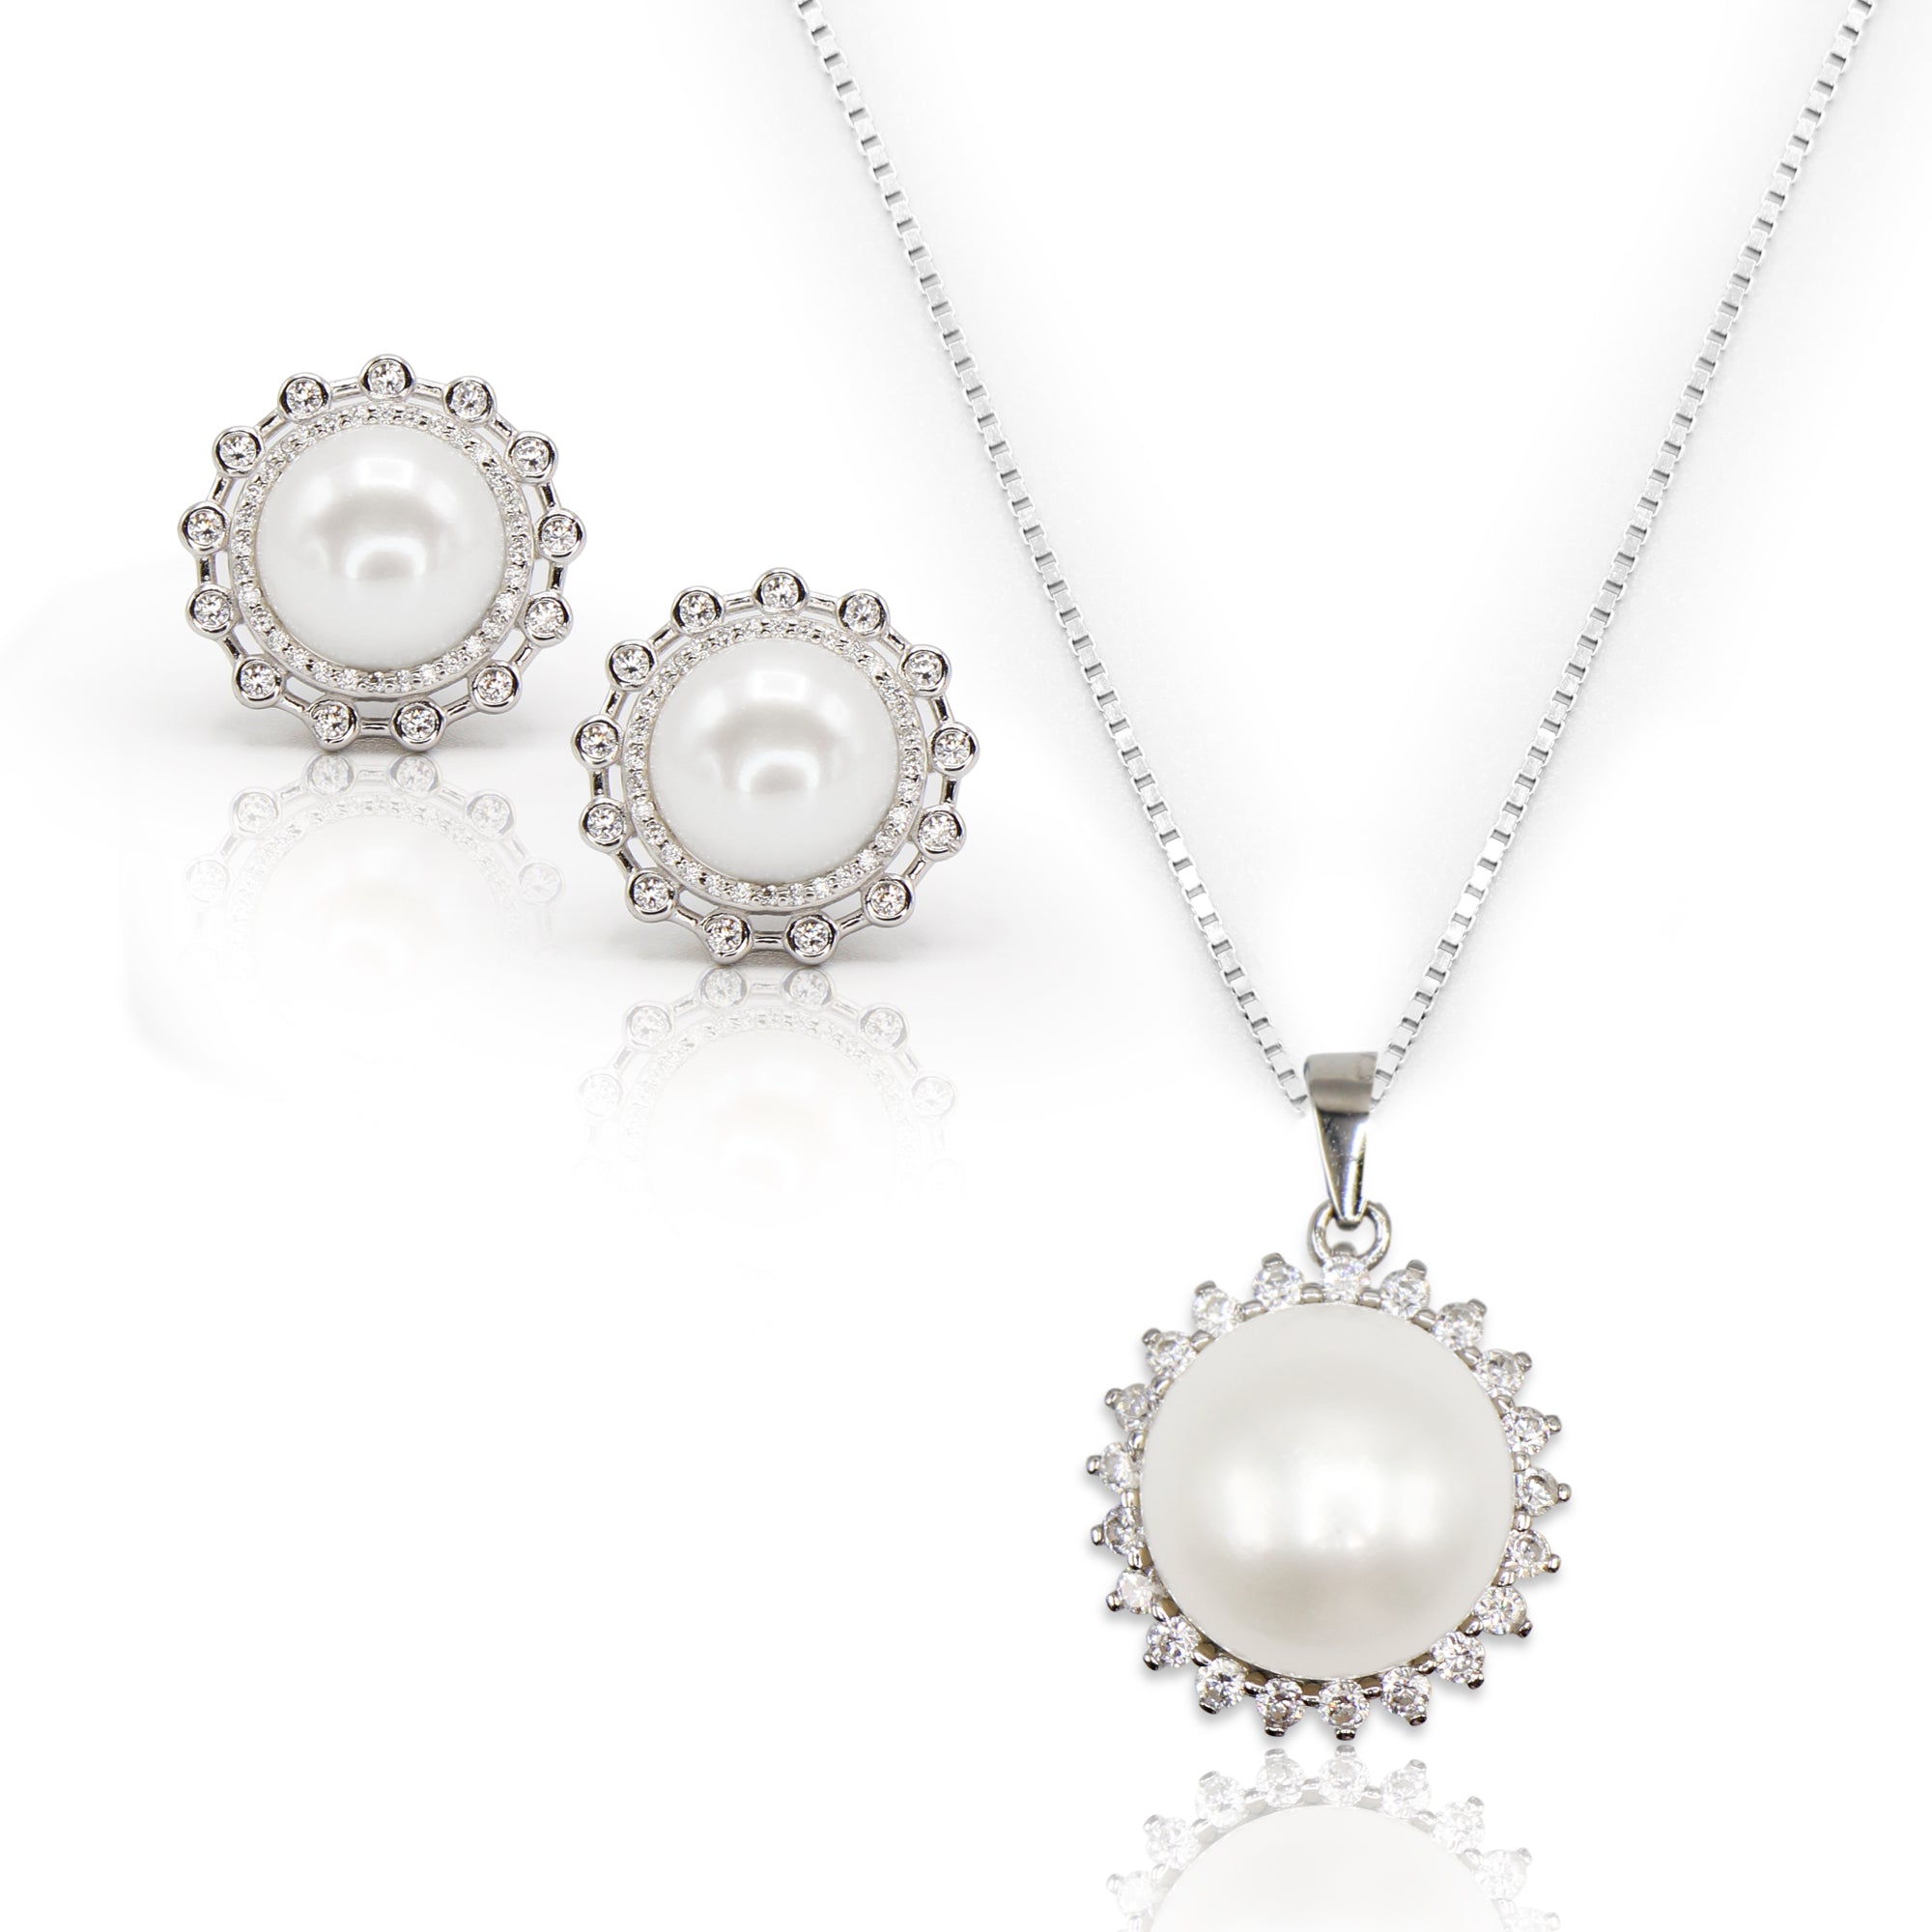 White Freshwater Pearl Halo Pendant with Sterling Silver Chain Necklace and Earring Set - L'Amour Pearls